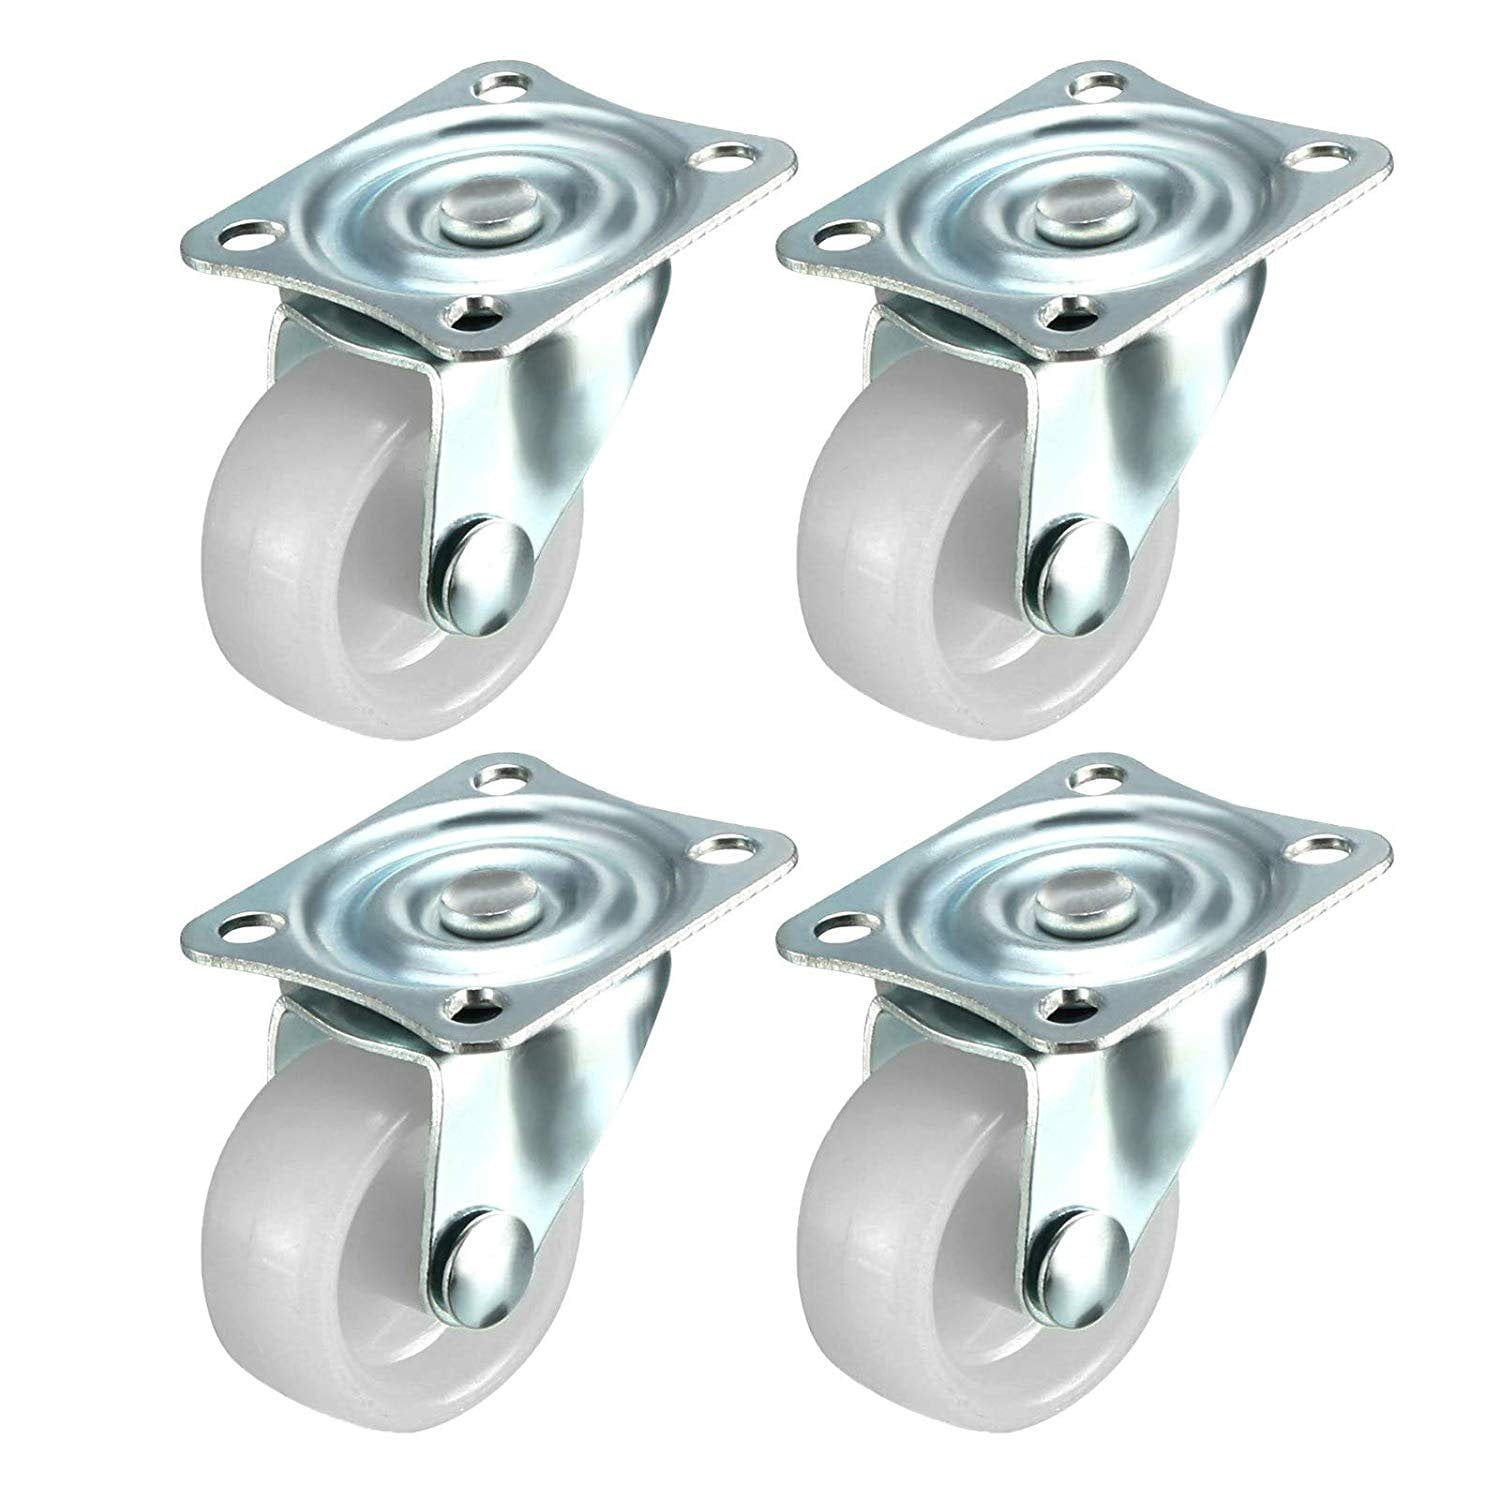 Swivel Plate Nylon Caster Wheels for Heavy Duty 2 inch Stable and Durable 